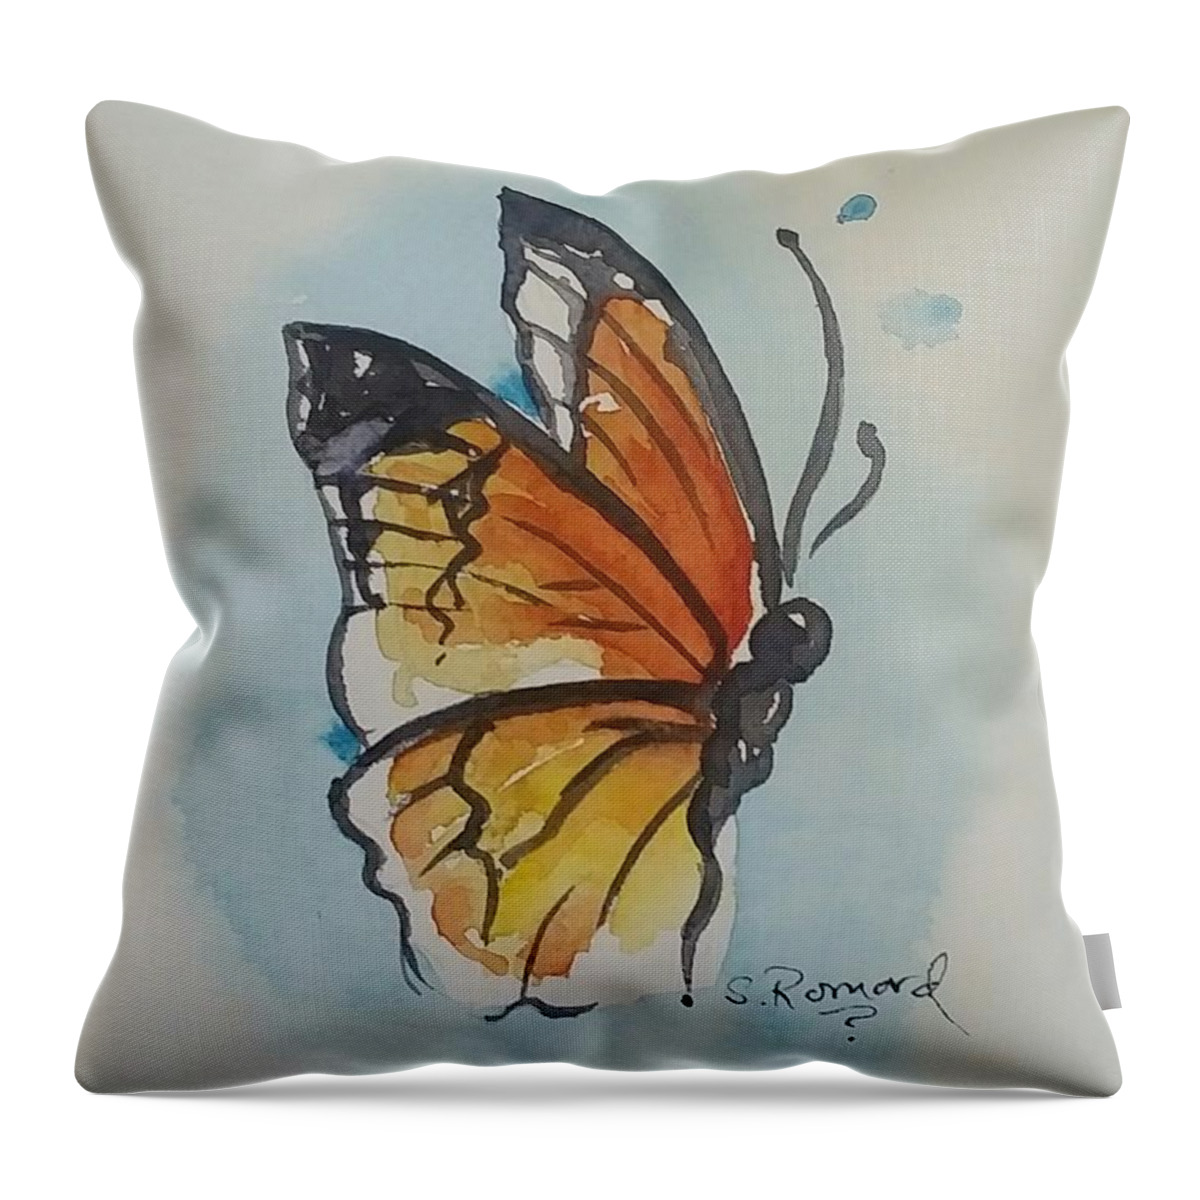  Throw Pillow featuring the painting Butterfly by Sheila Romard